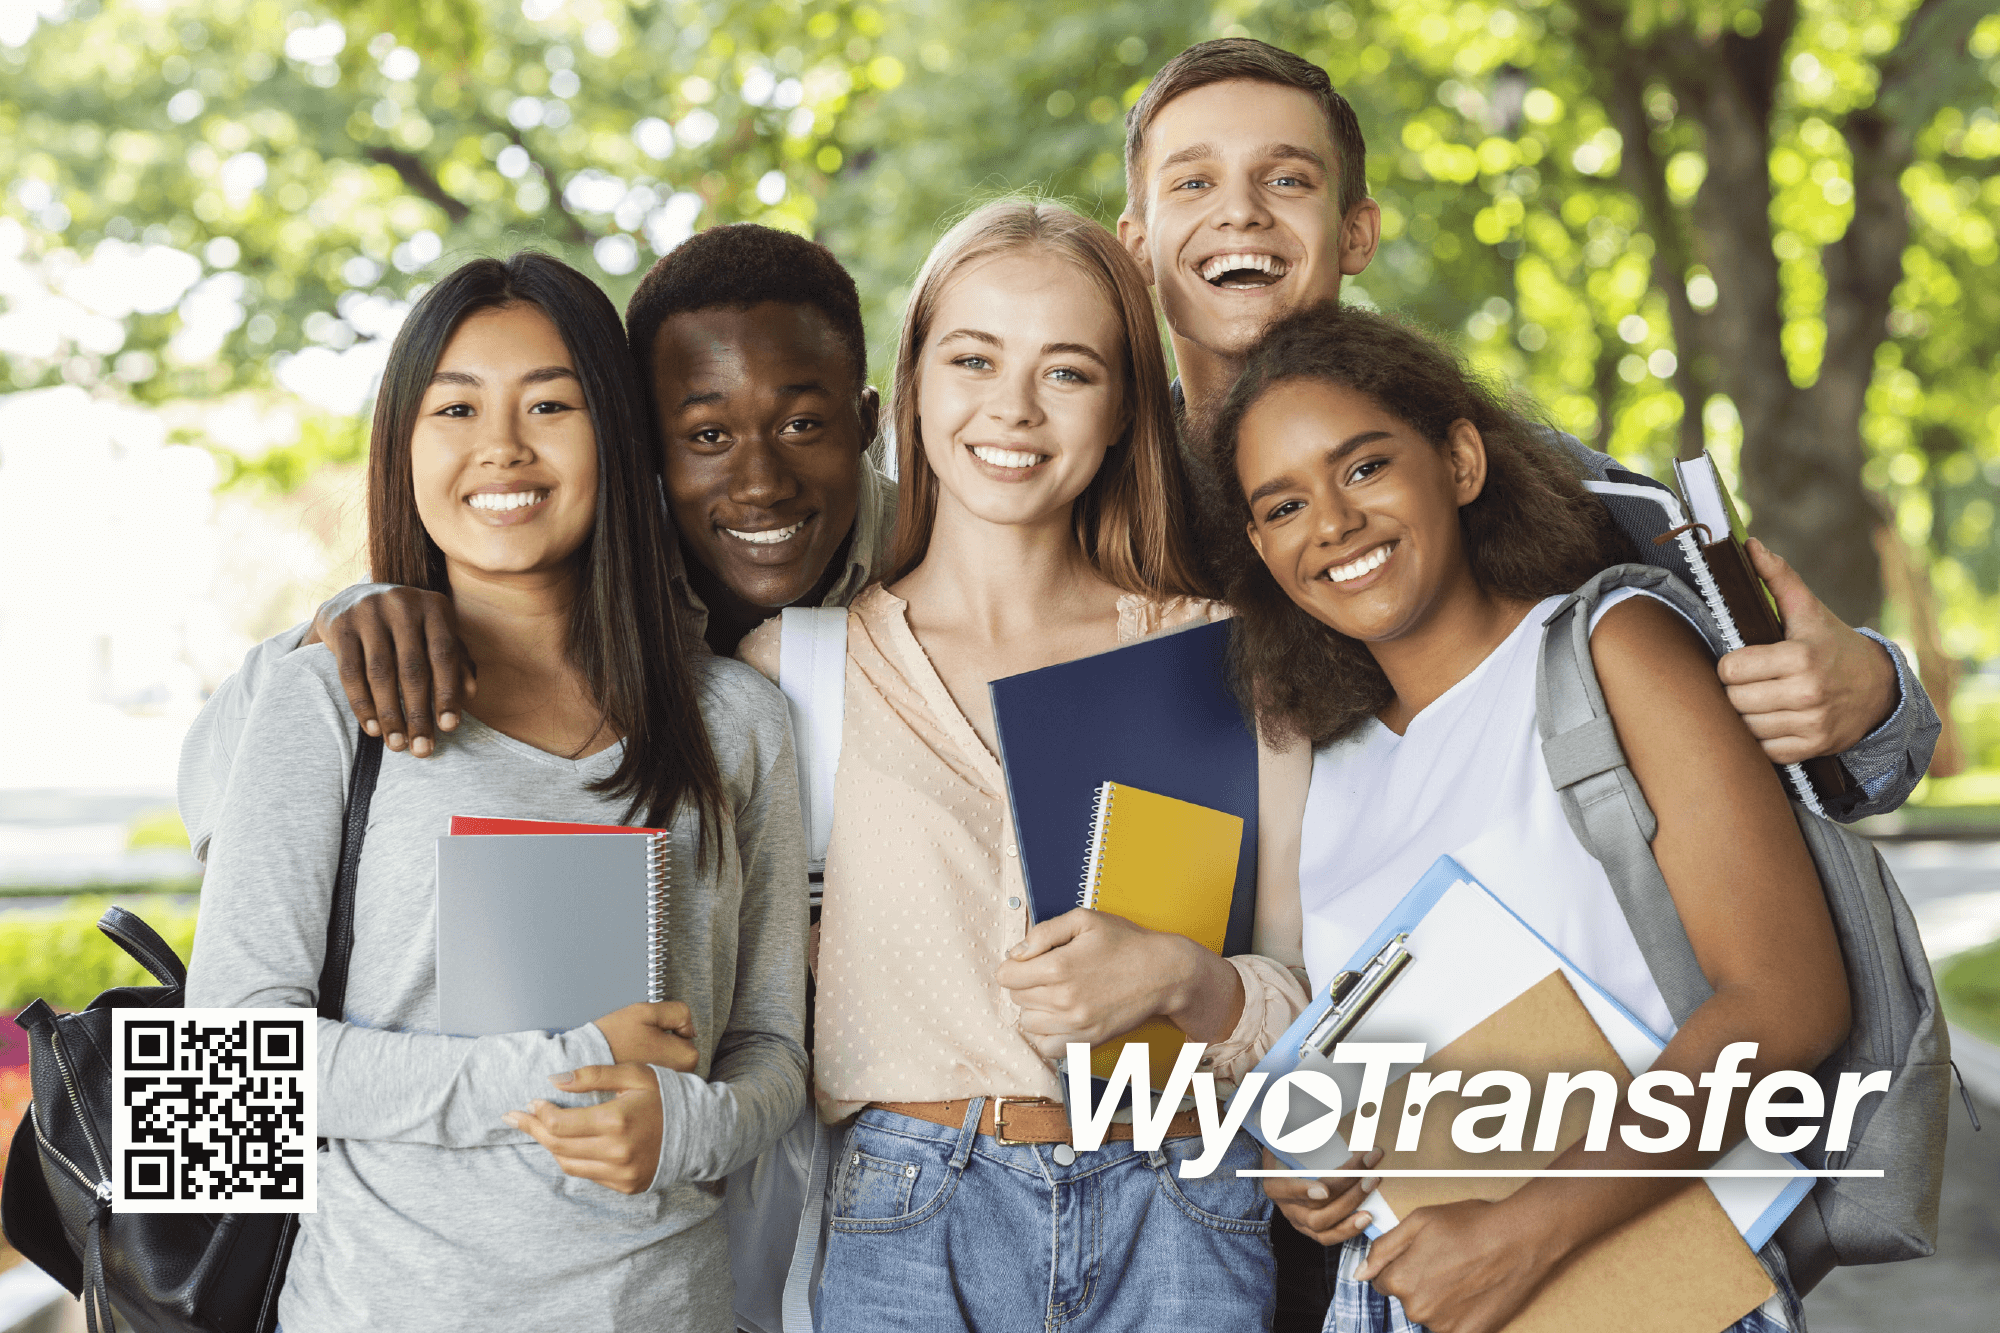 Photo of a group of college students with the word "WyoTransfer."